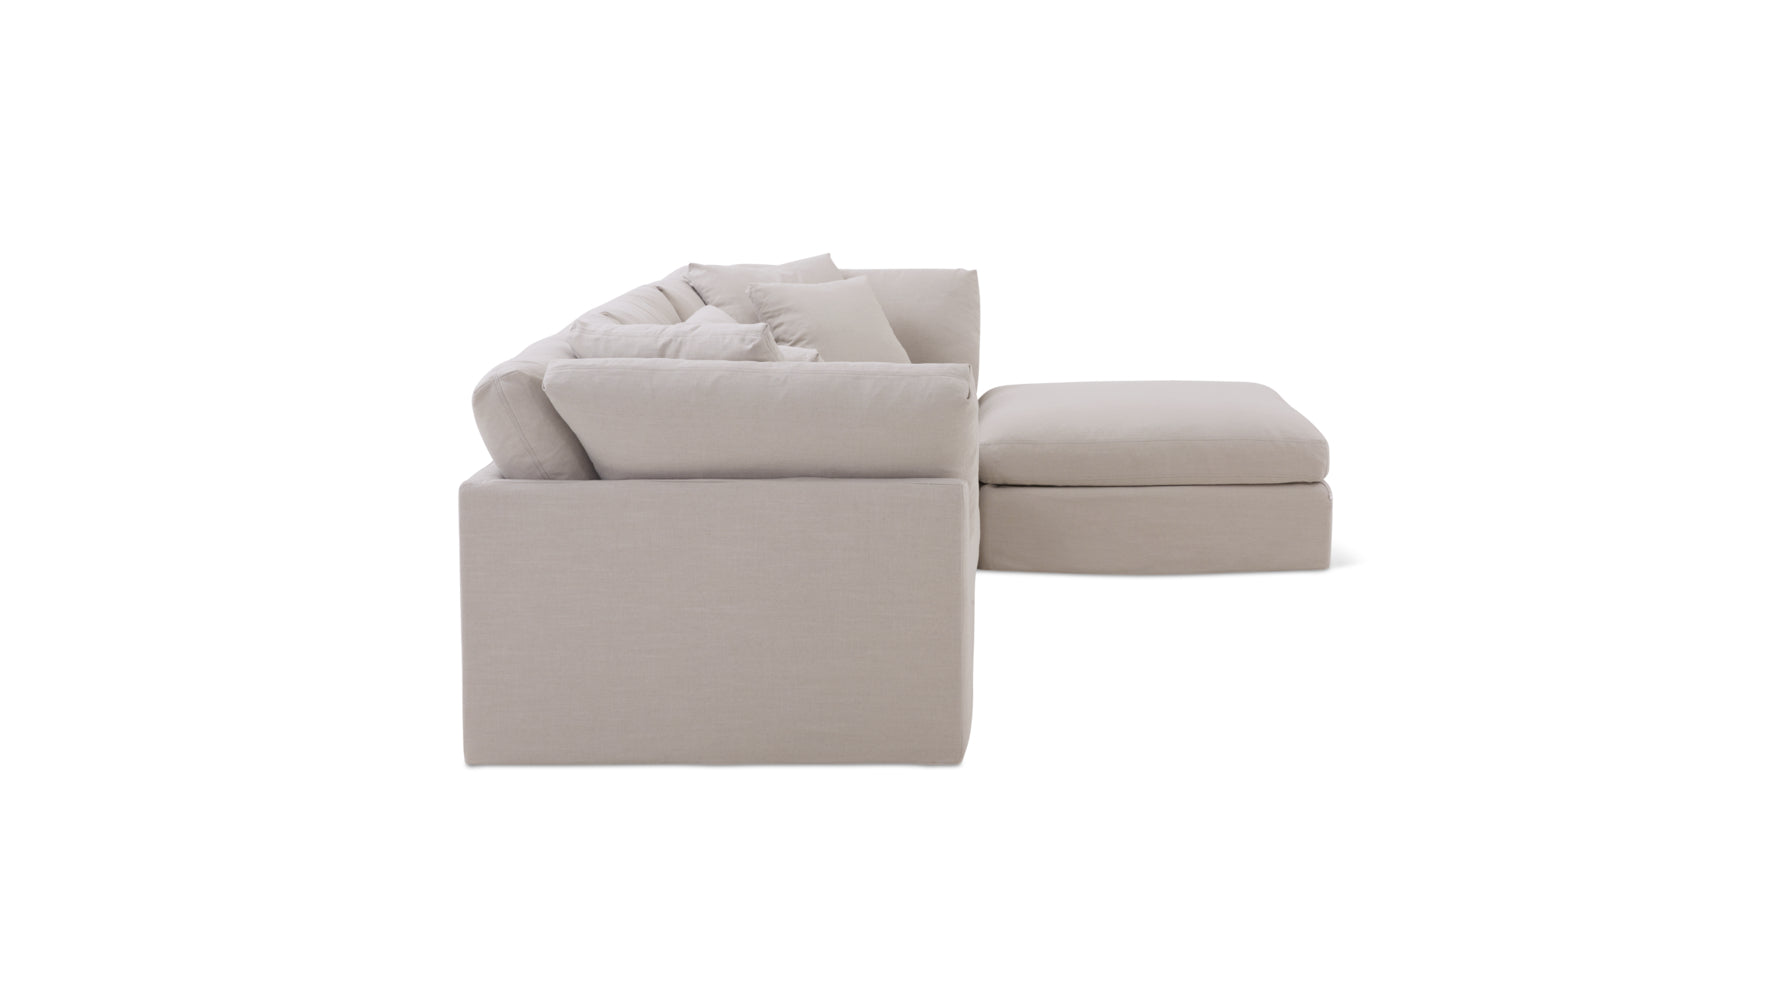 Get Together™ 4-Piece Modular Sectional, Large, Clay - Image 7